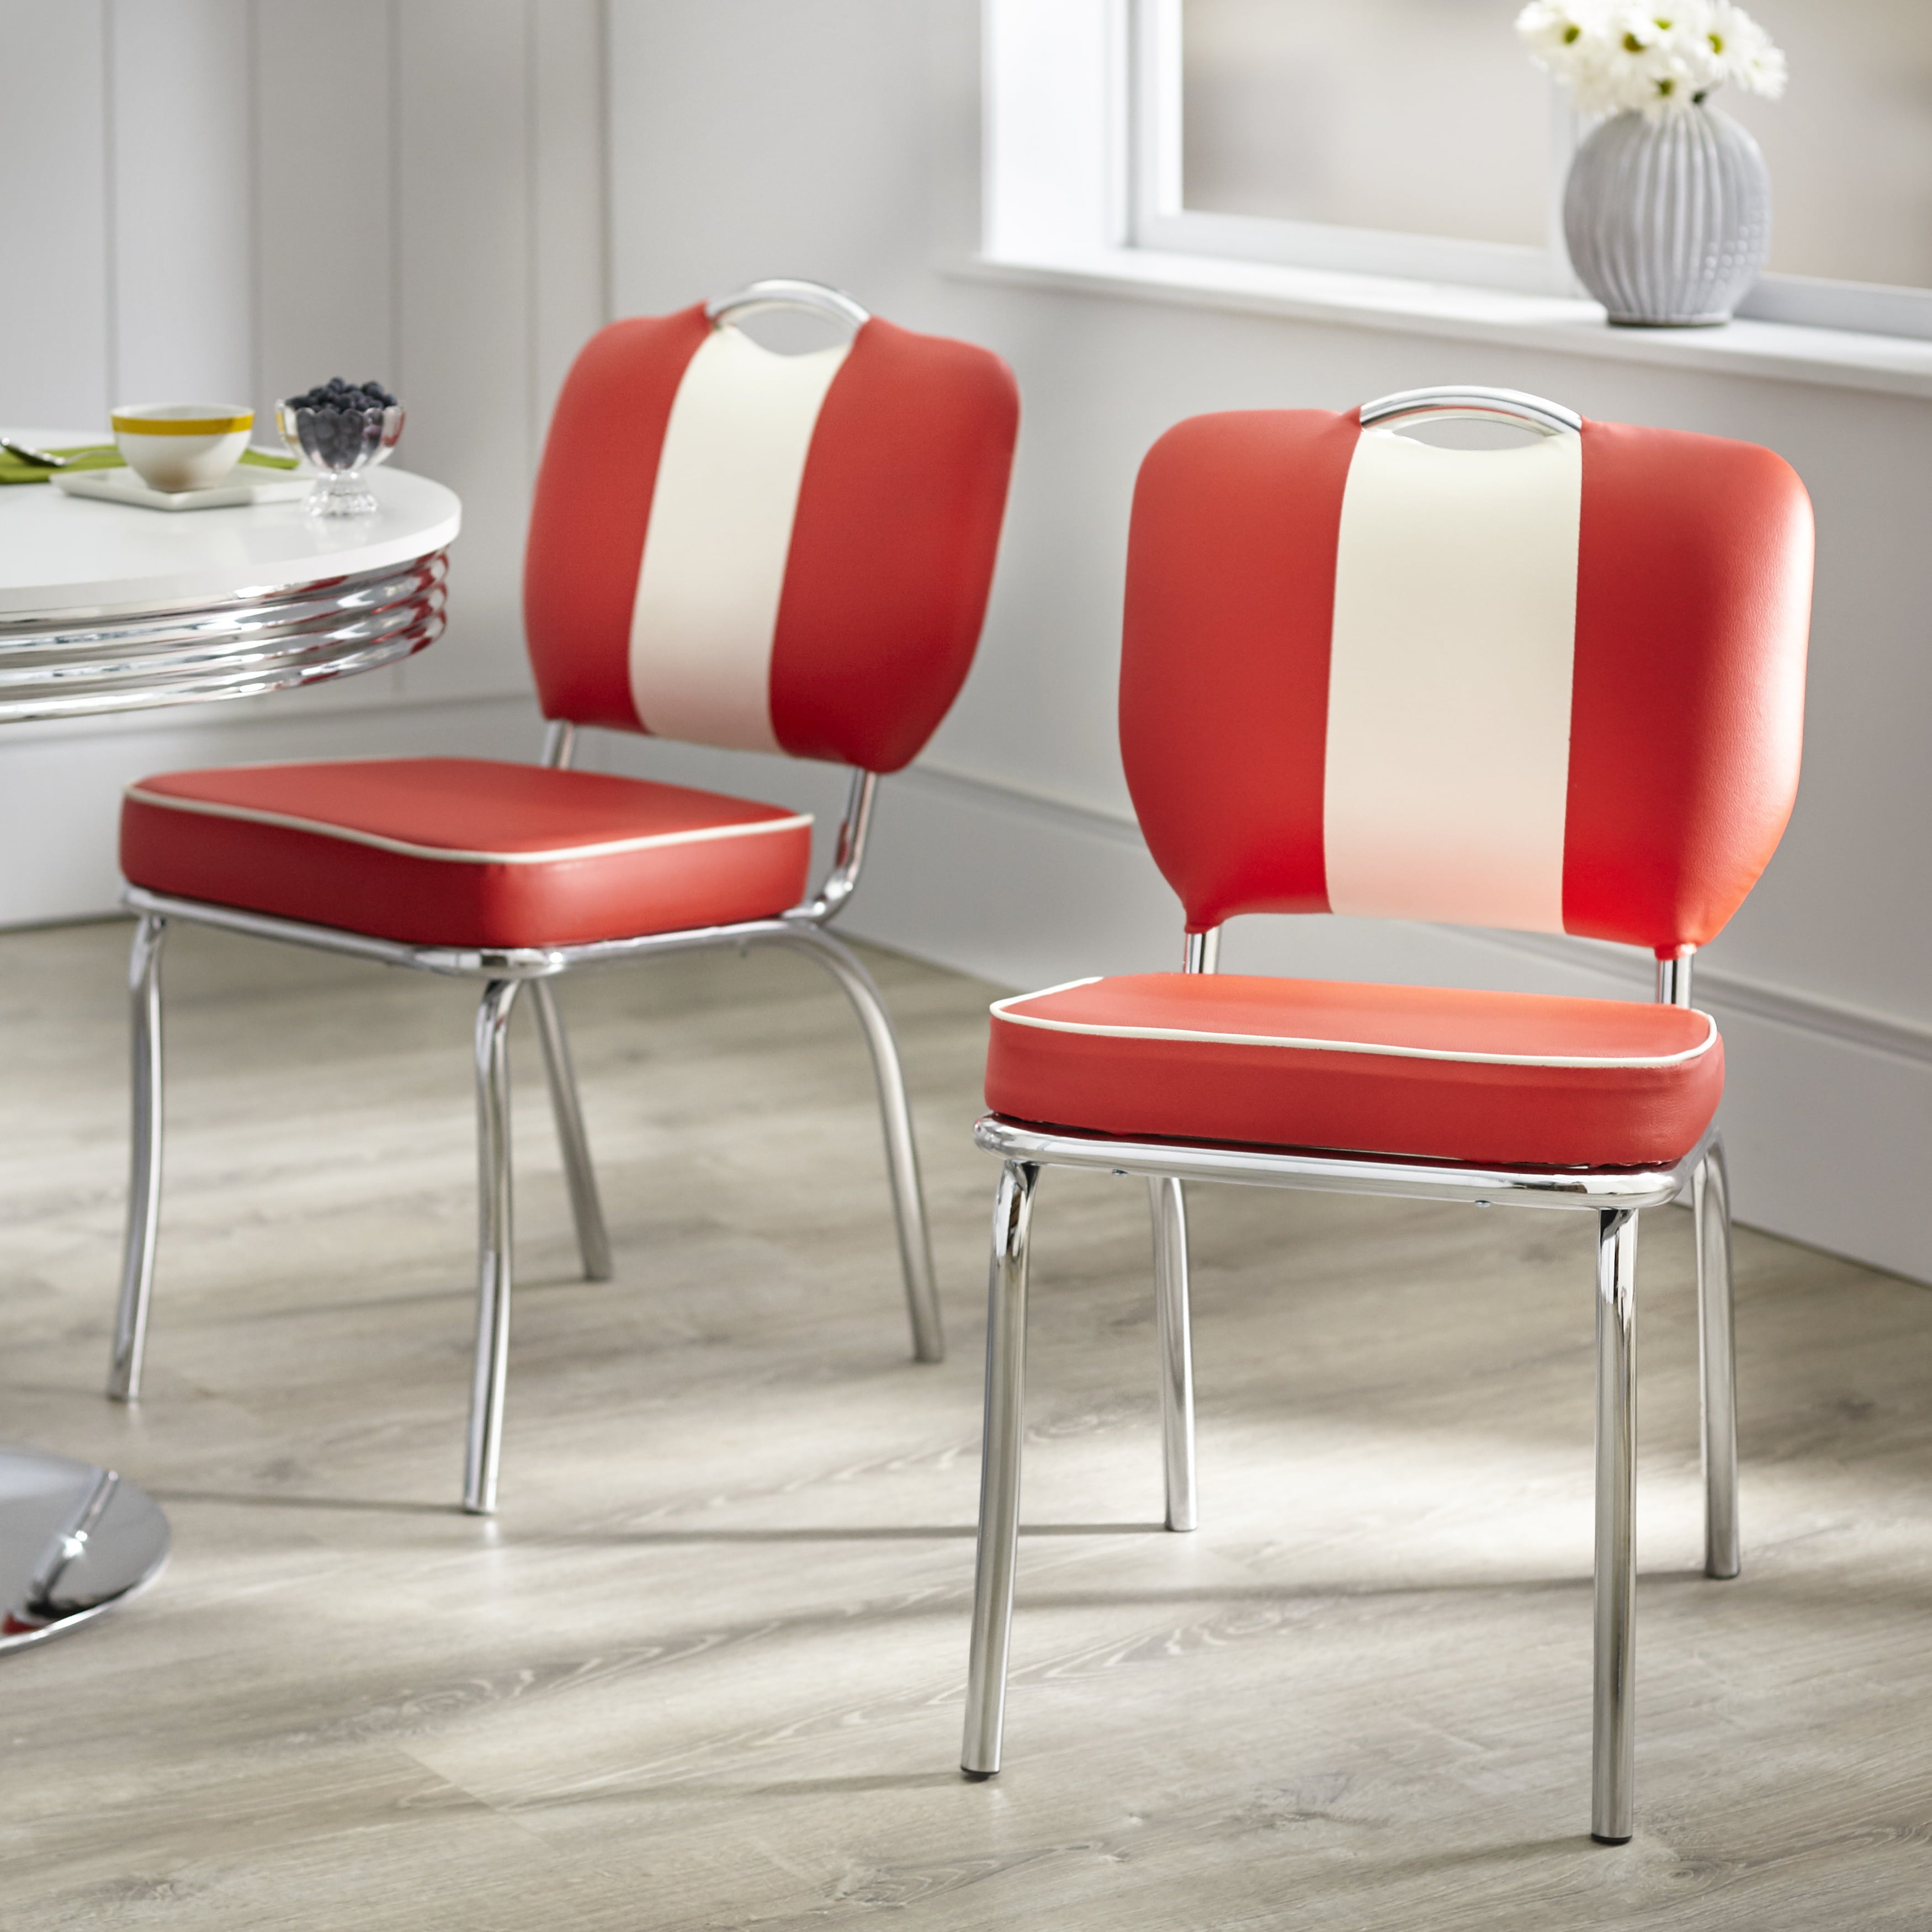 Raleigh Retro Dining Chairs， Multiple Colors